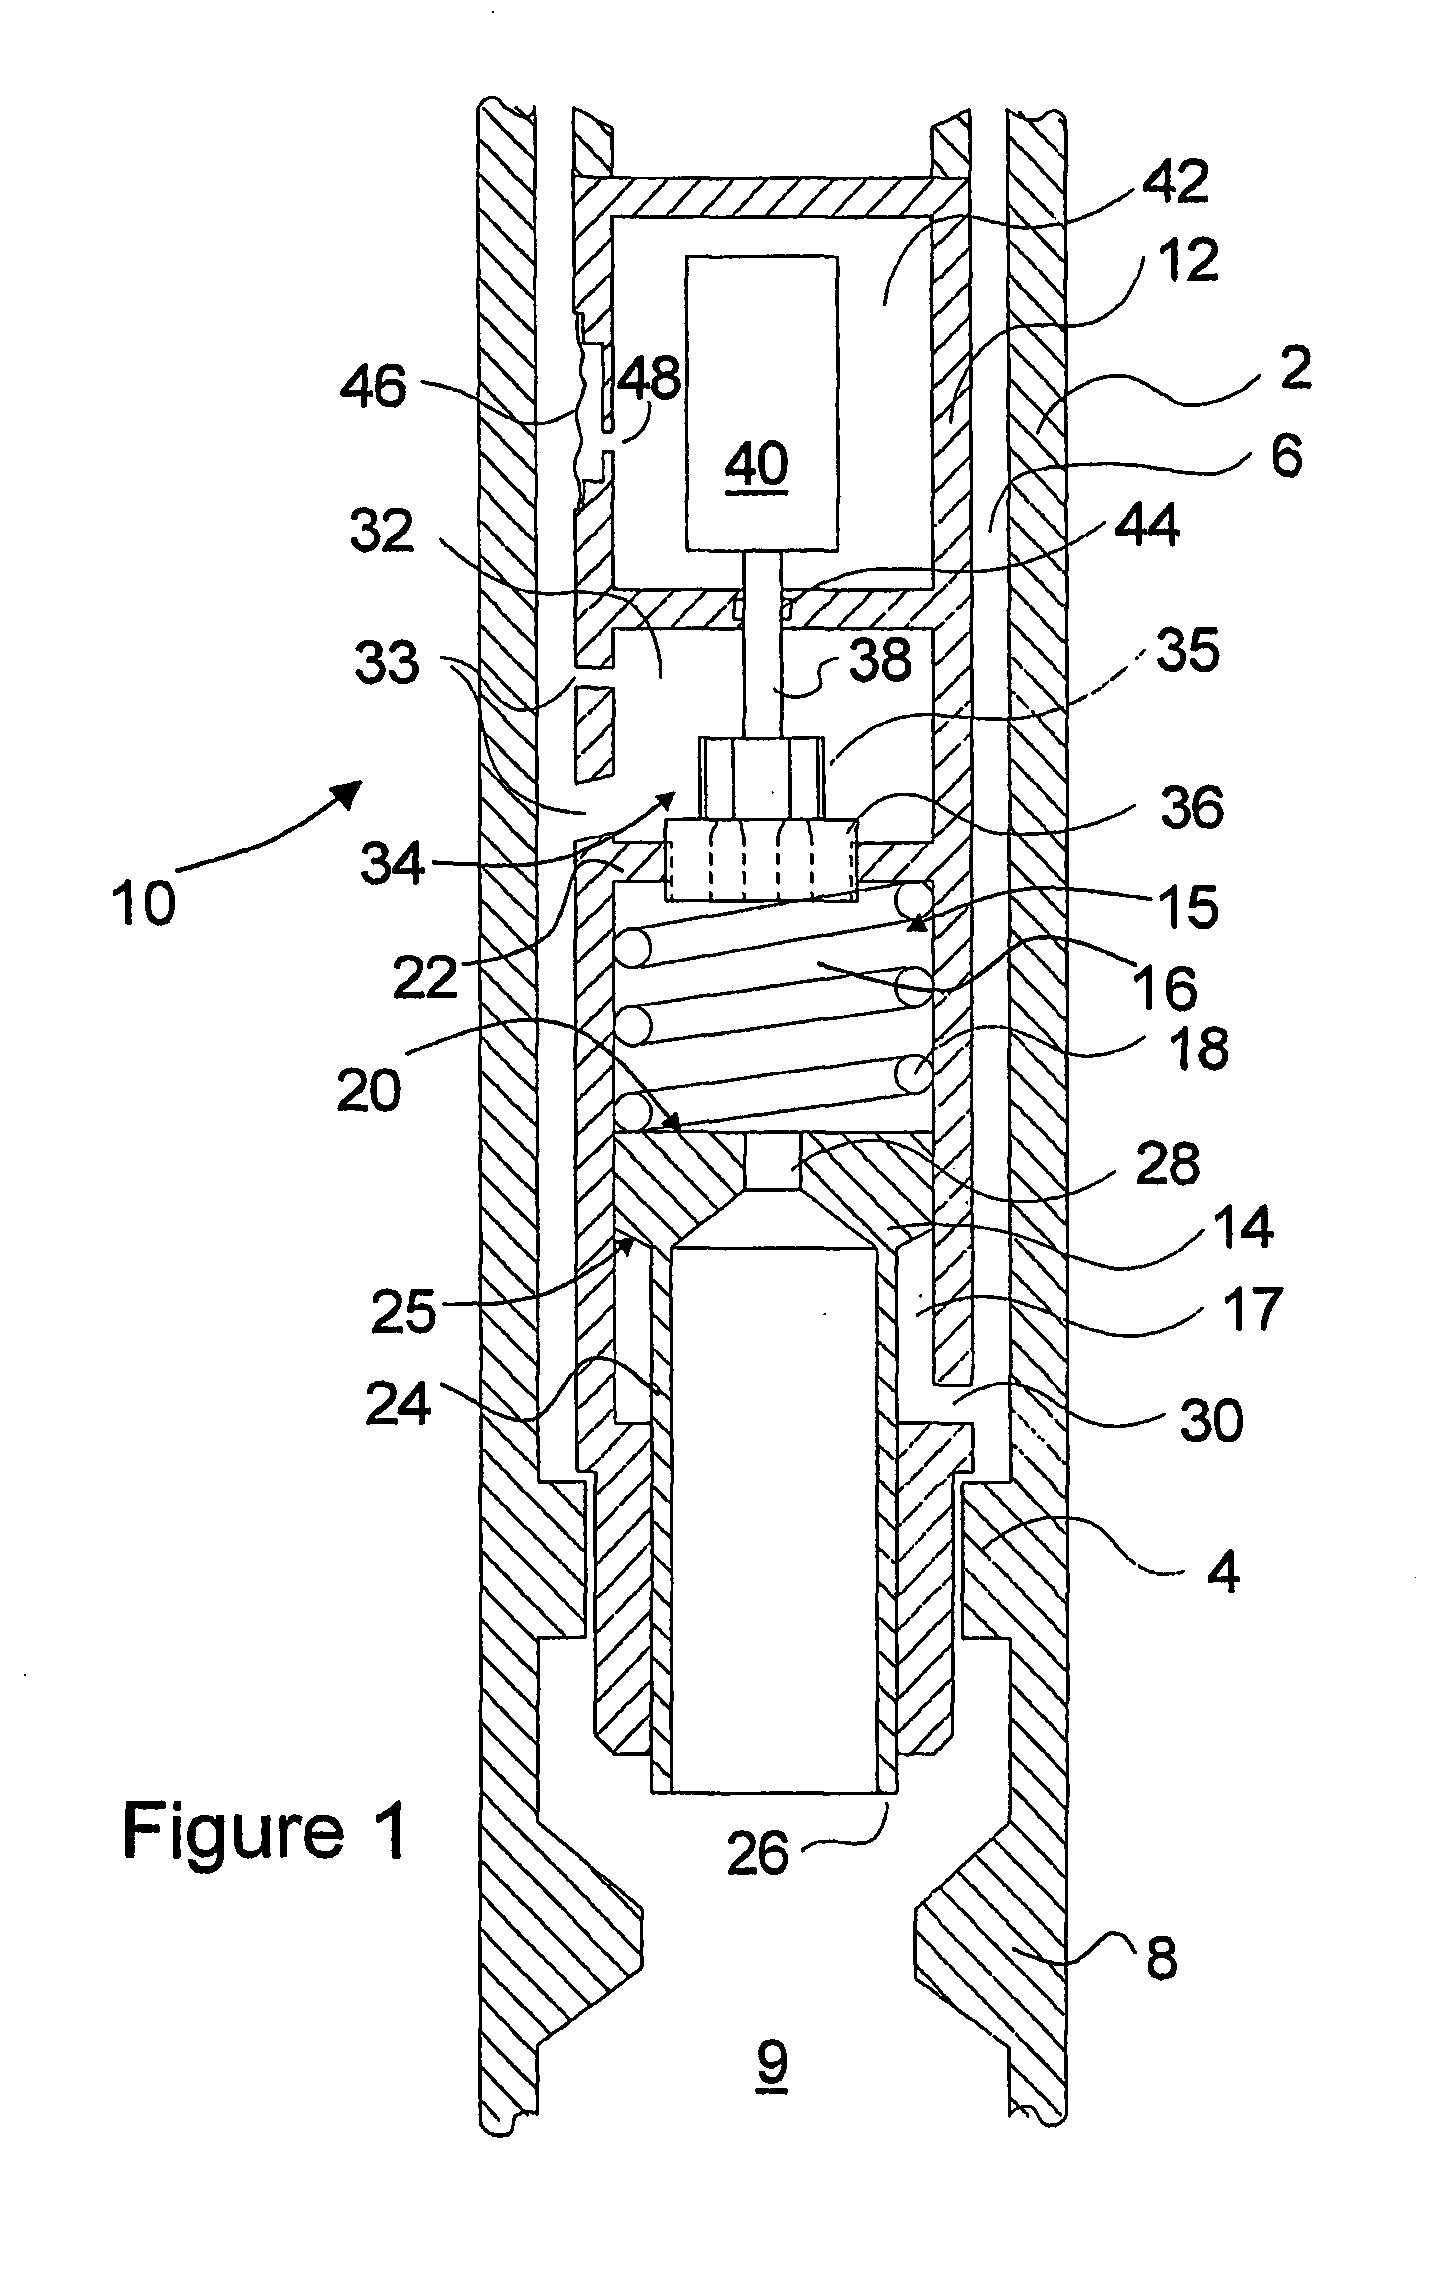 Apparatus for creating pressure pulses in the fluid of a bore hole